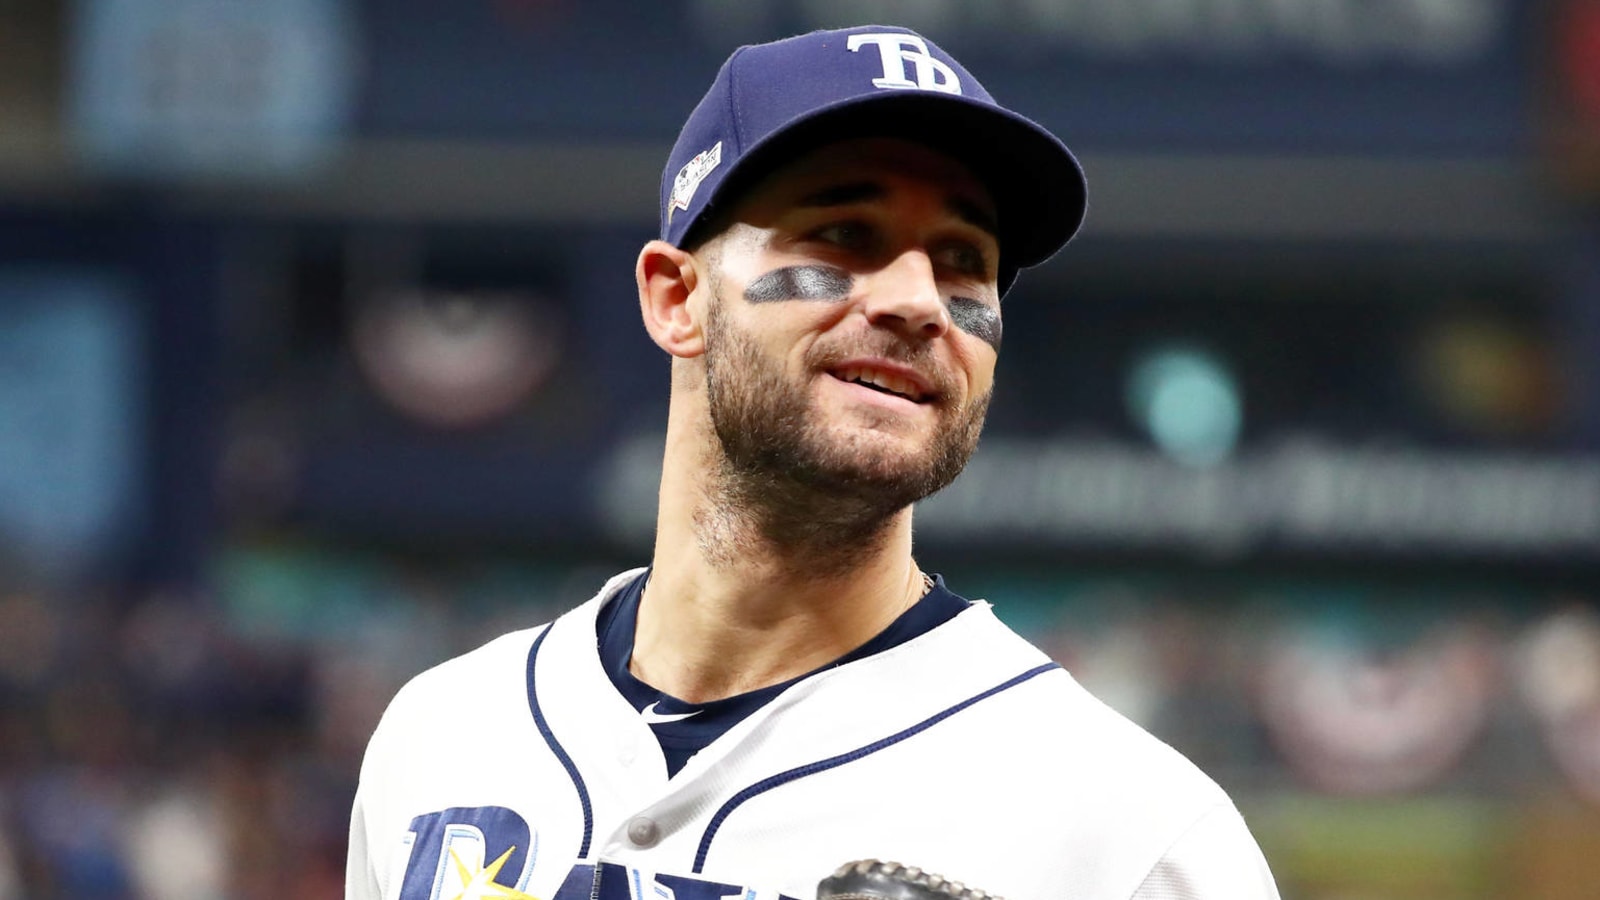 Kevin Kiermaier: From the 31st round to three Gold Gloves (and